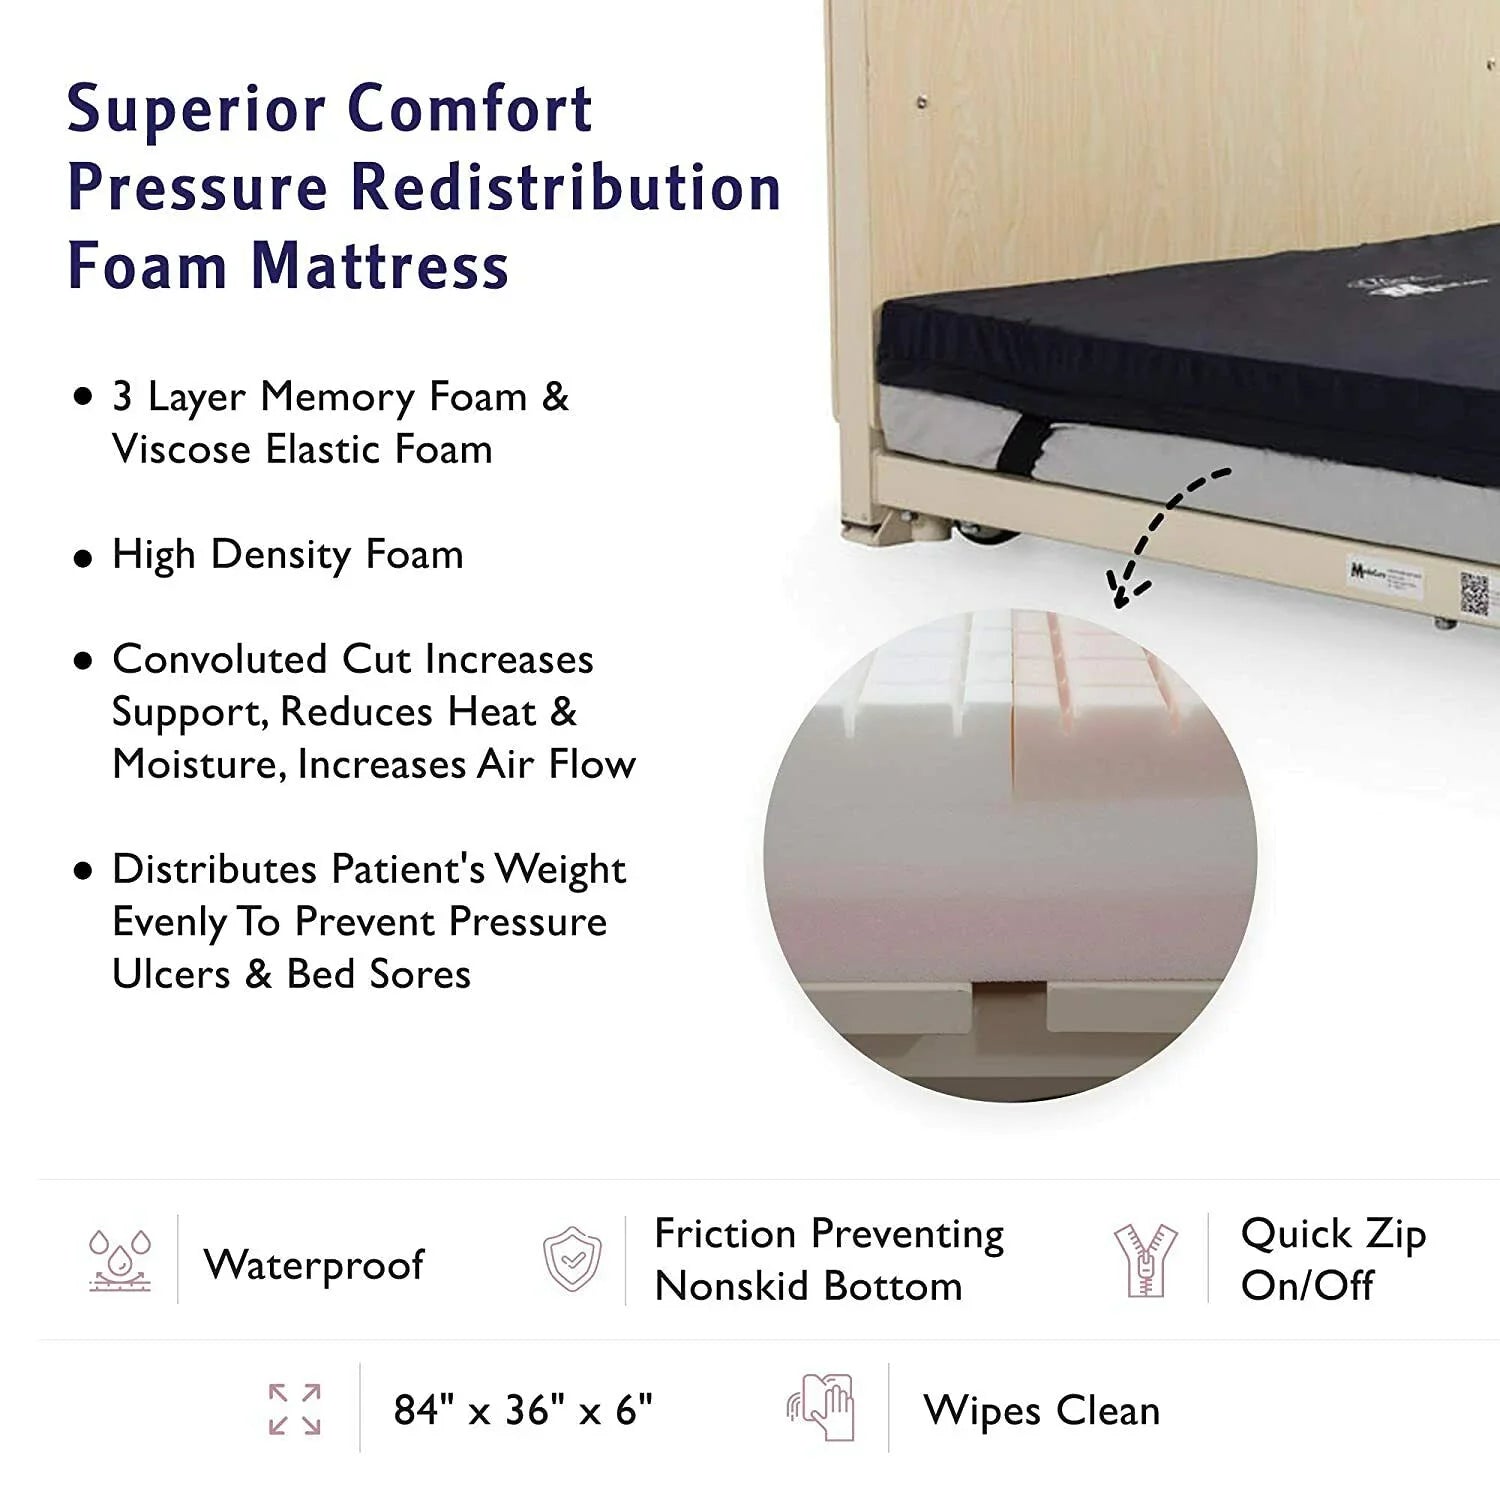 Ultra Low Full Electric Hospital Bed w/ Premium Foam Mattress and Pivot Rails - ProHeal-Products